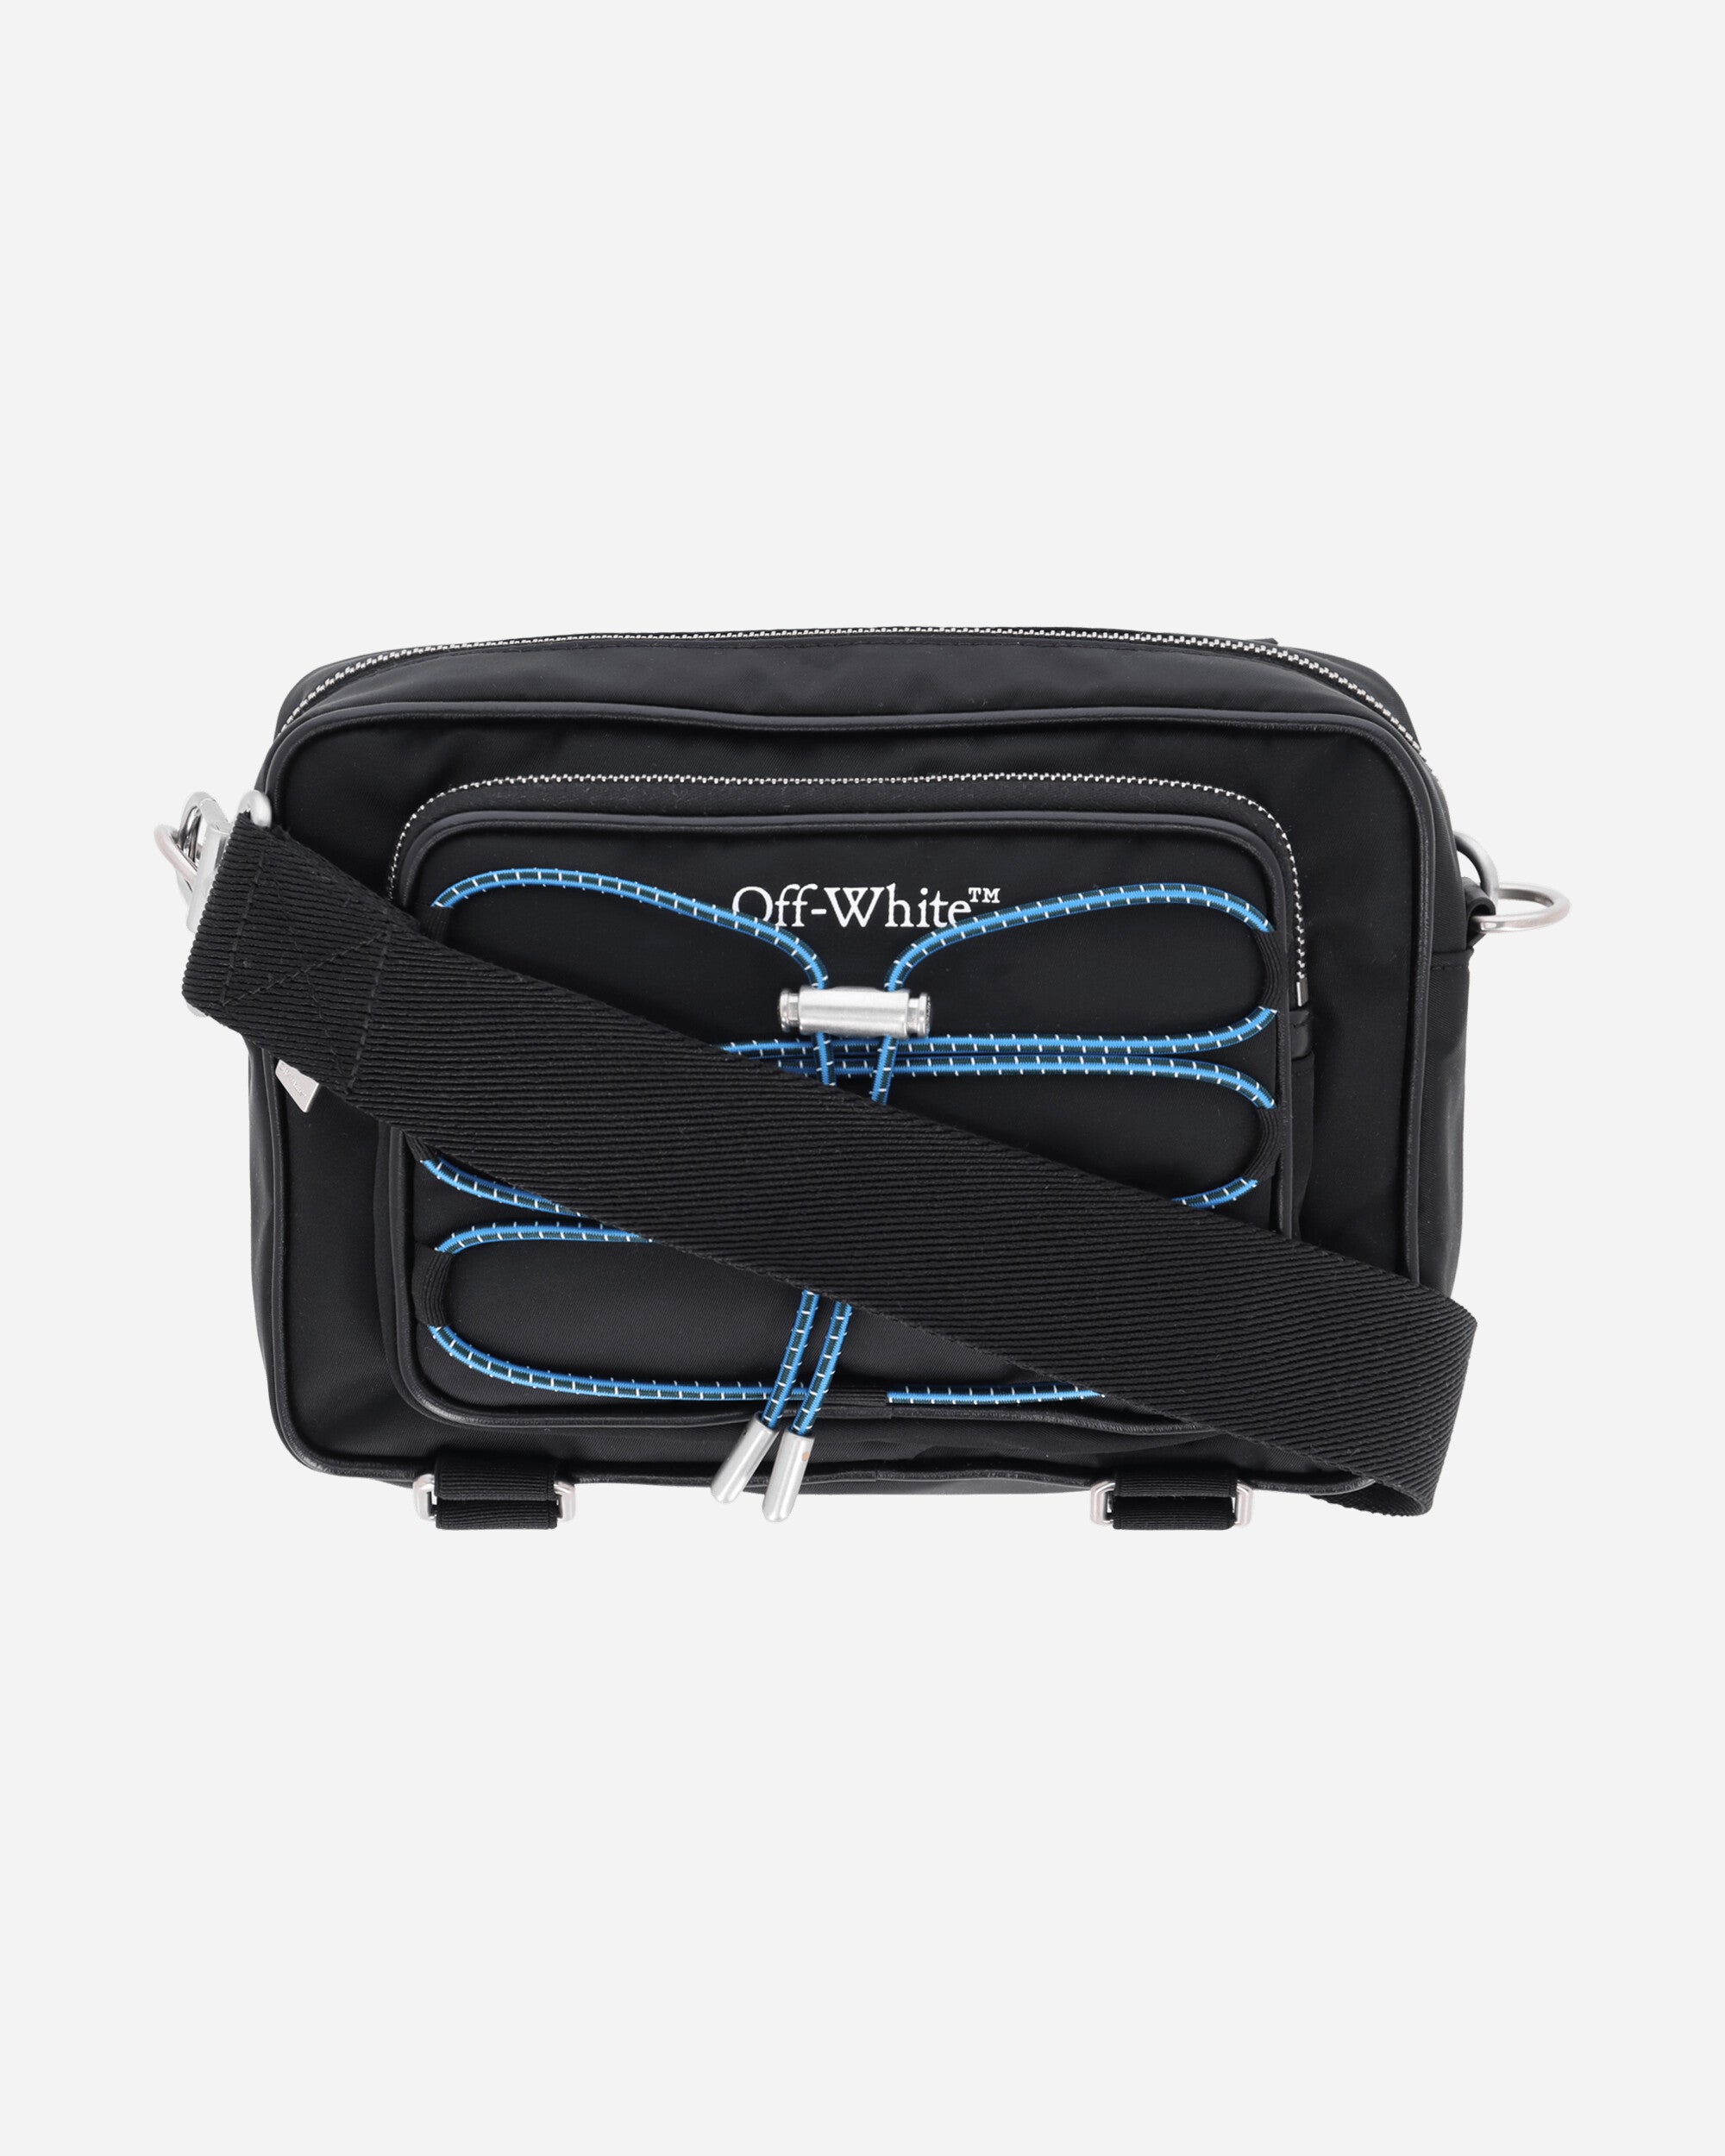 Off-White Courrier Camera Black/Multicolor Bags and Backpacks Shoulder Bags OMNQ070F23FAB001 1000